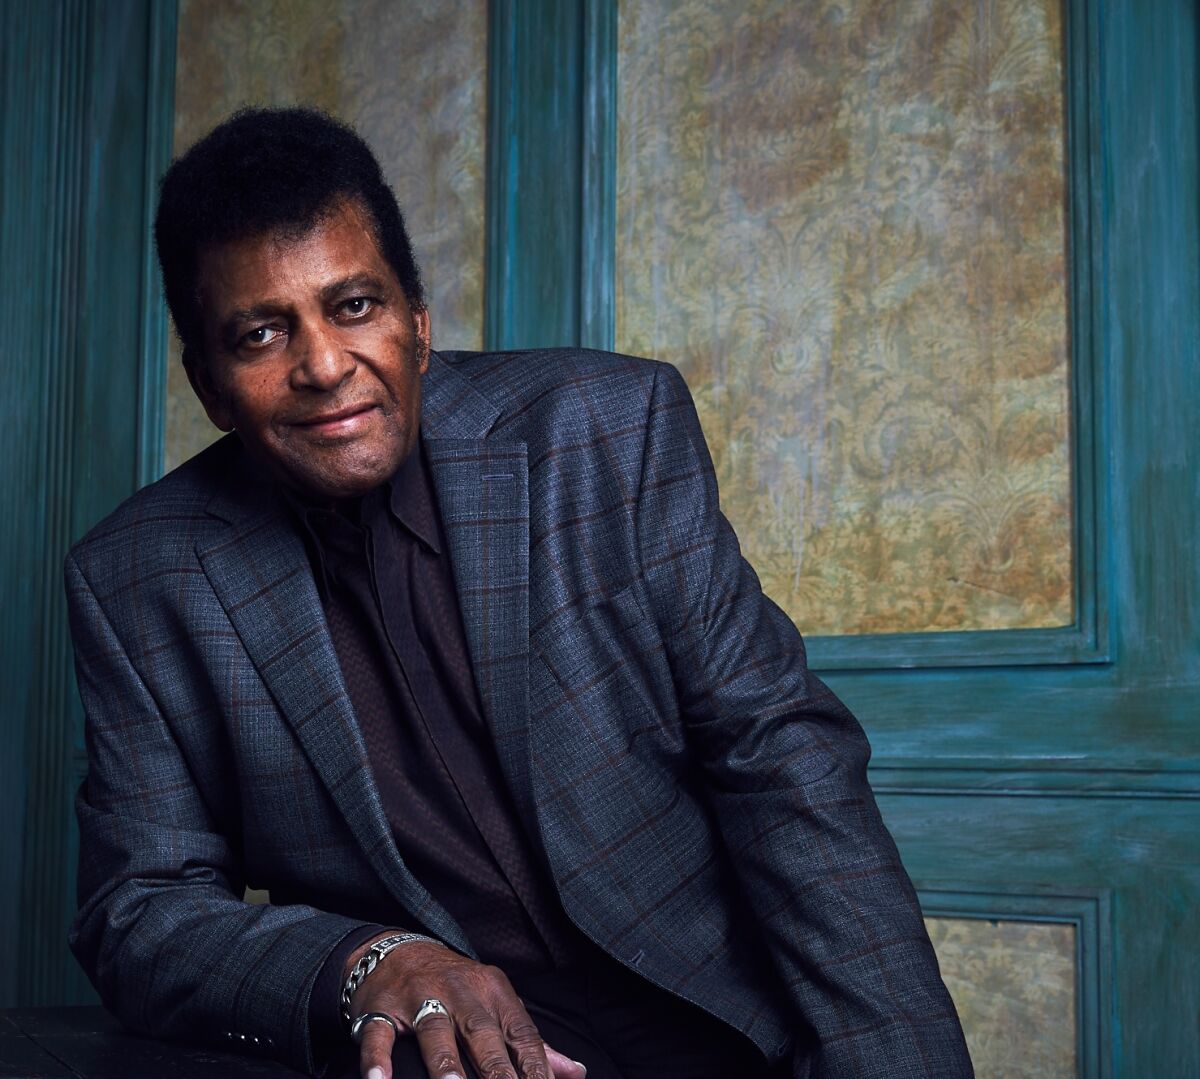 A portrait of the late Charley Pride